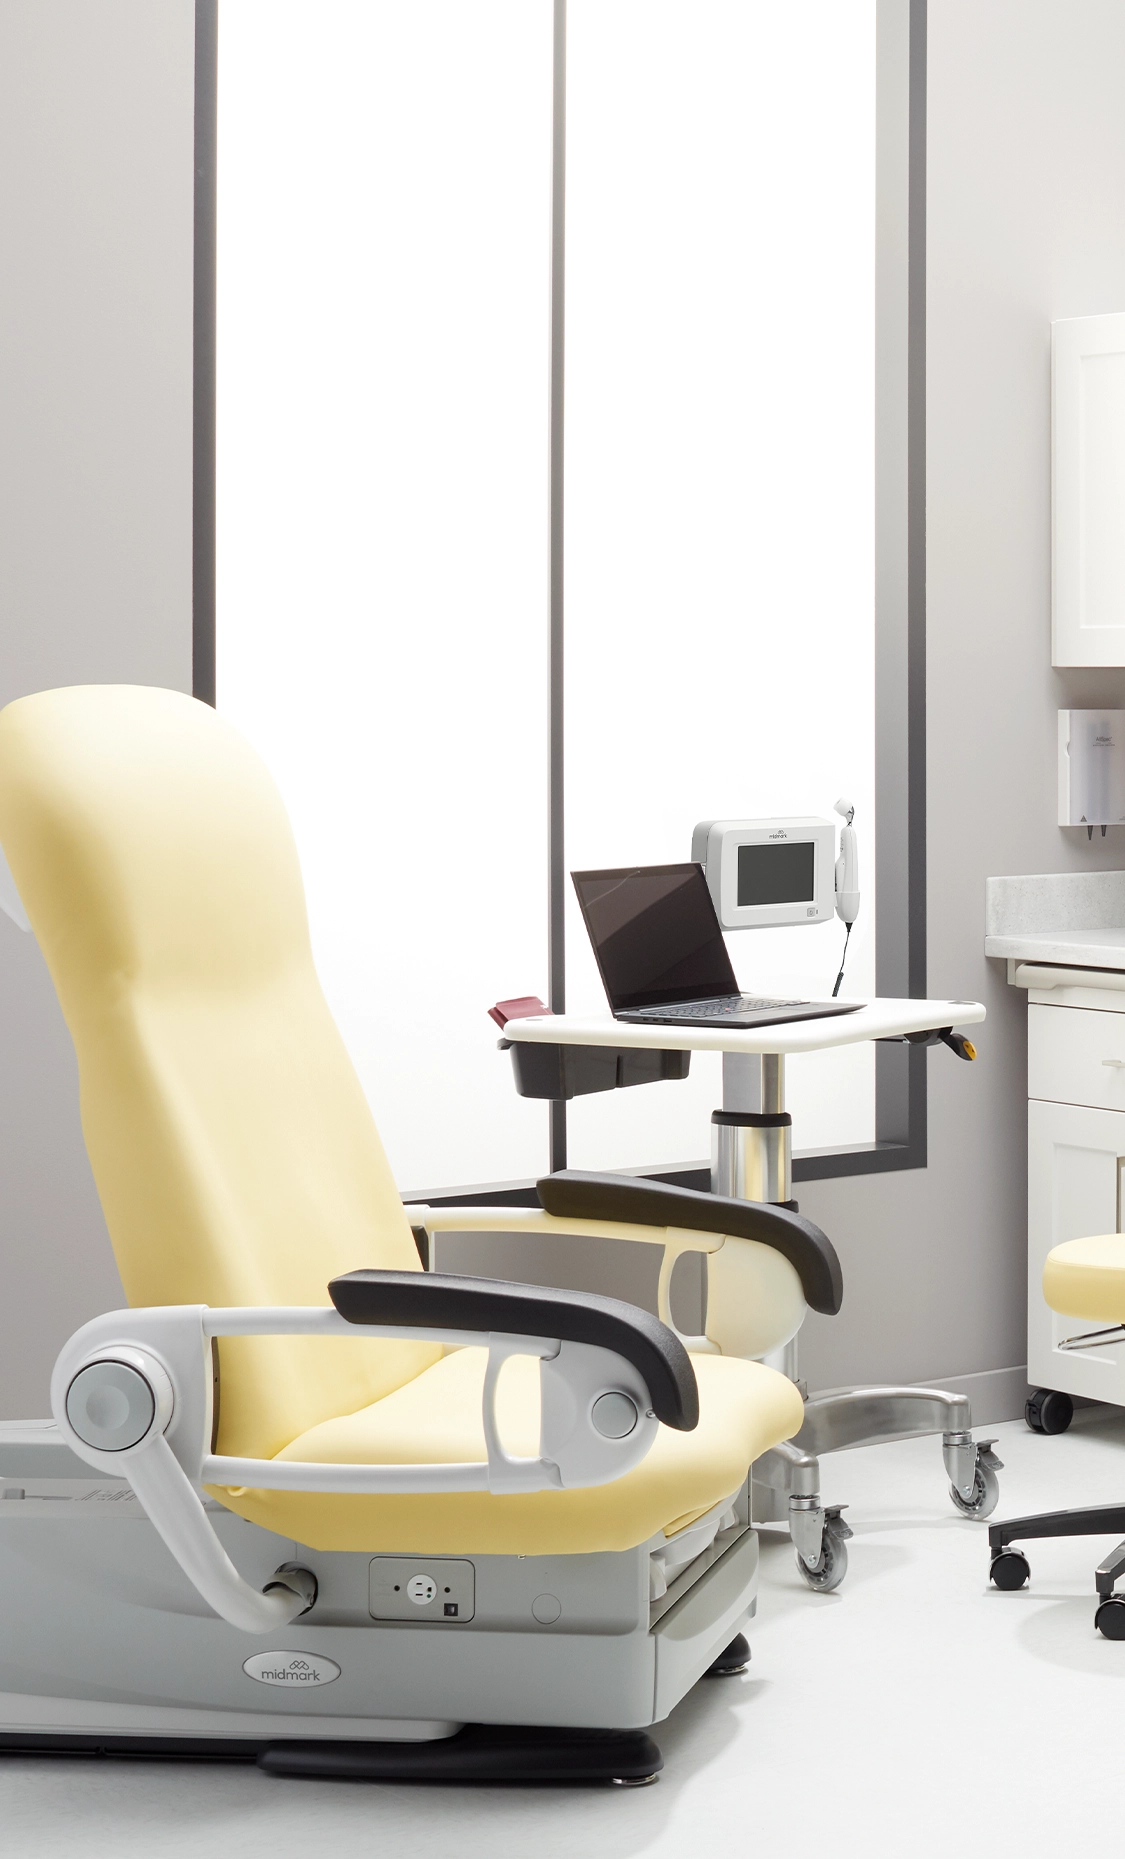 Exam room with Midmark products